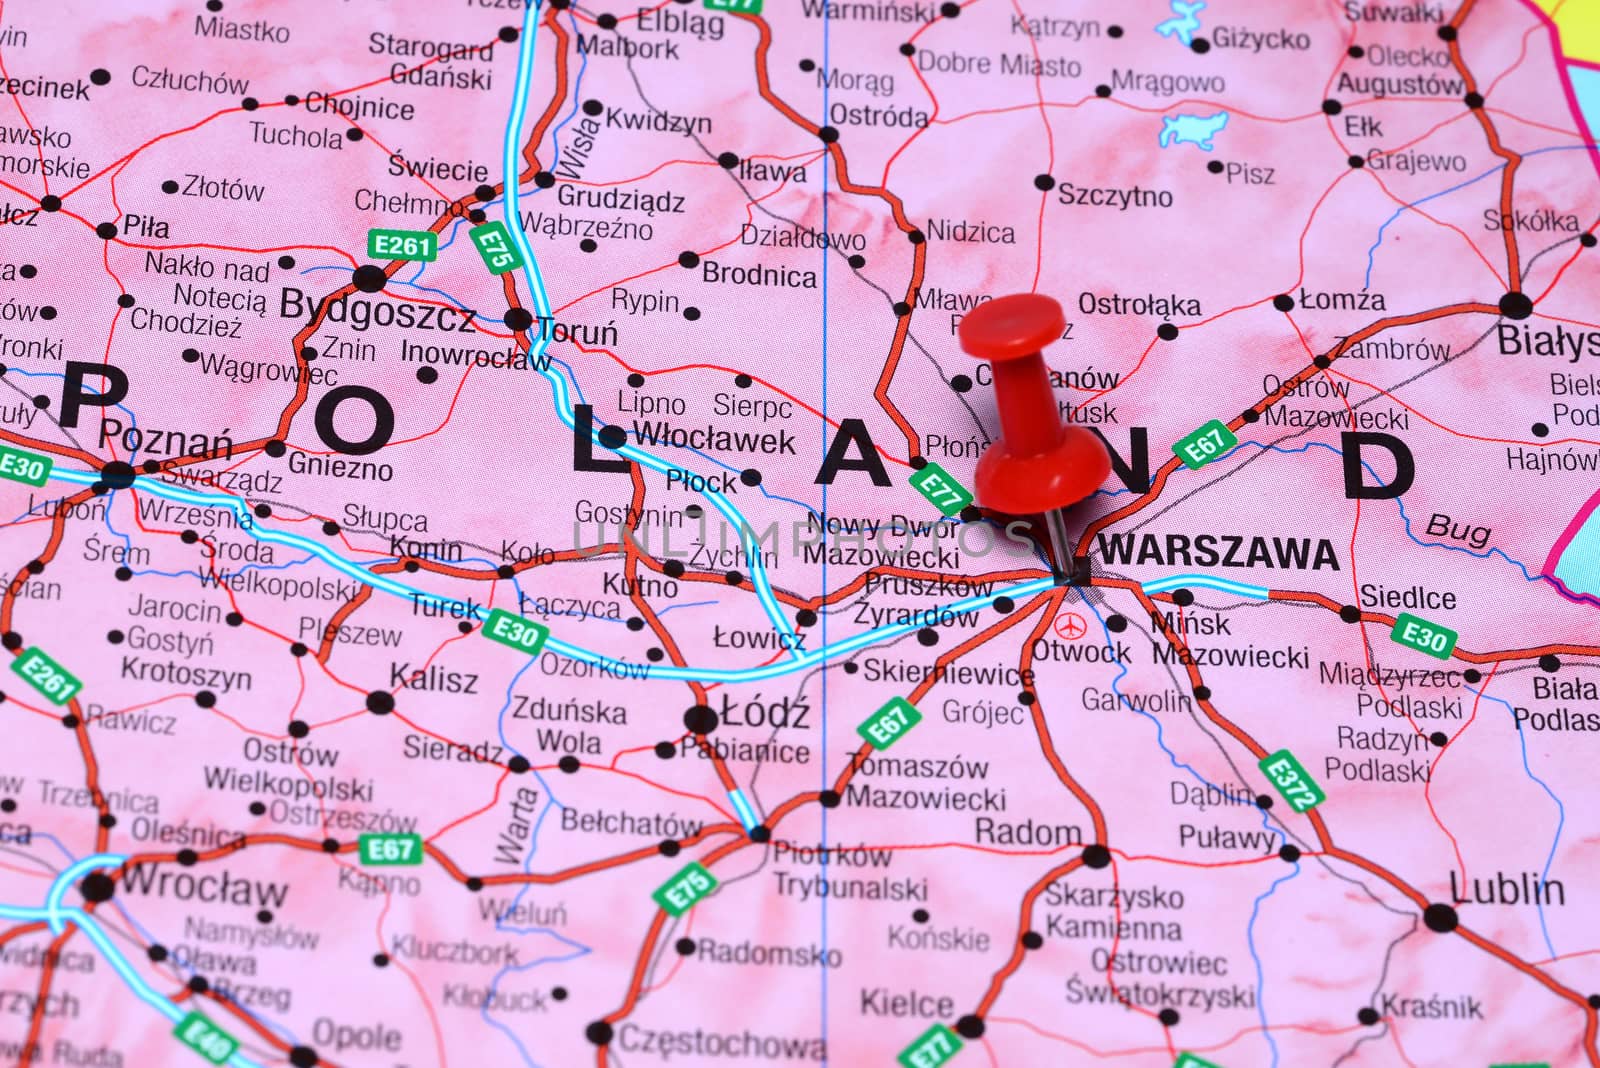 Photo of pinned Warsaw on a map of europe. May be used as illustration for traveling theme.